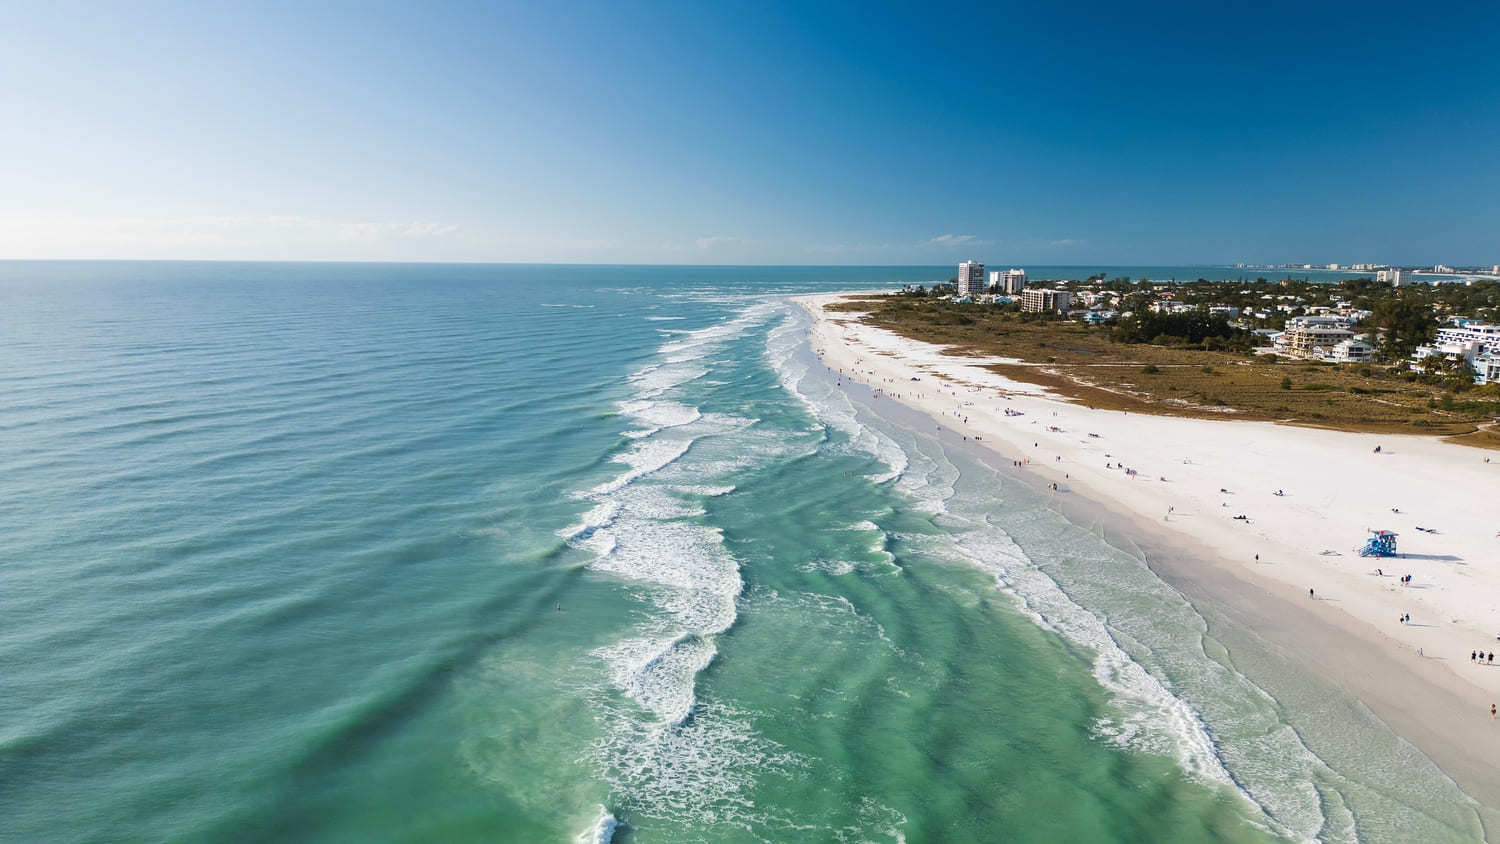 Drone Fly view over beach in Siesta Key, Florida. Beautiful Siesta Key beach on a sunny day. Turquoise transparent water and blue sea in Siesta Key beach.